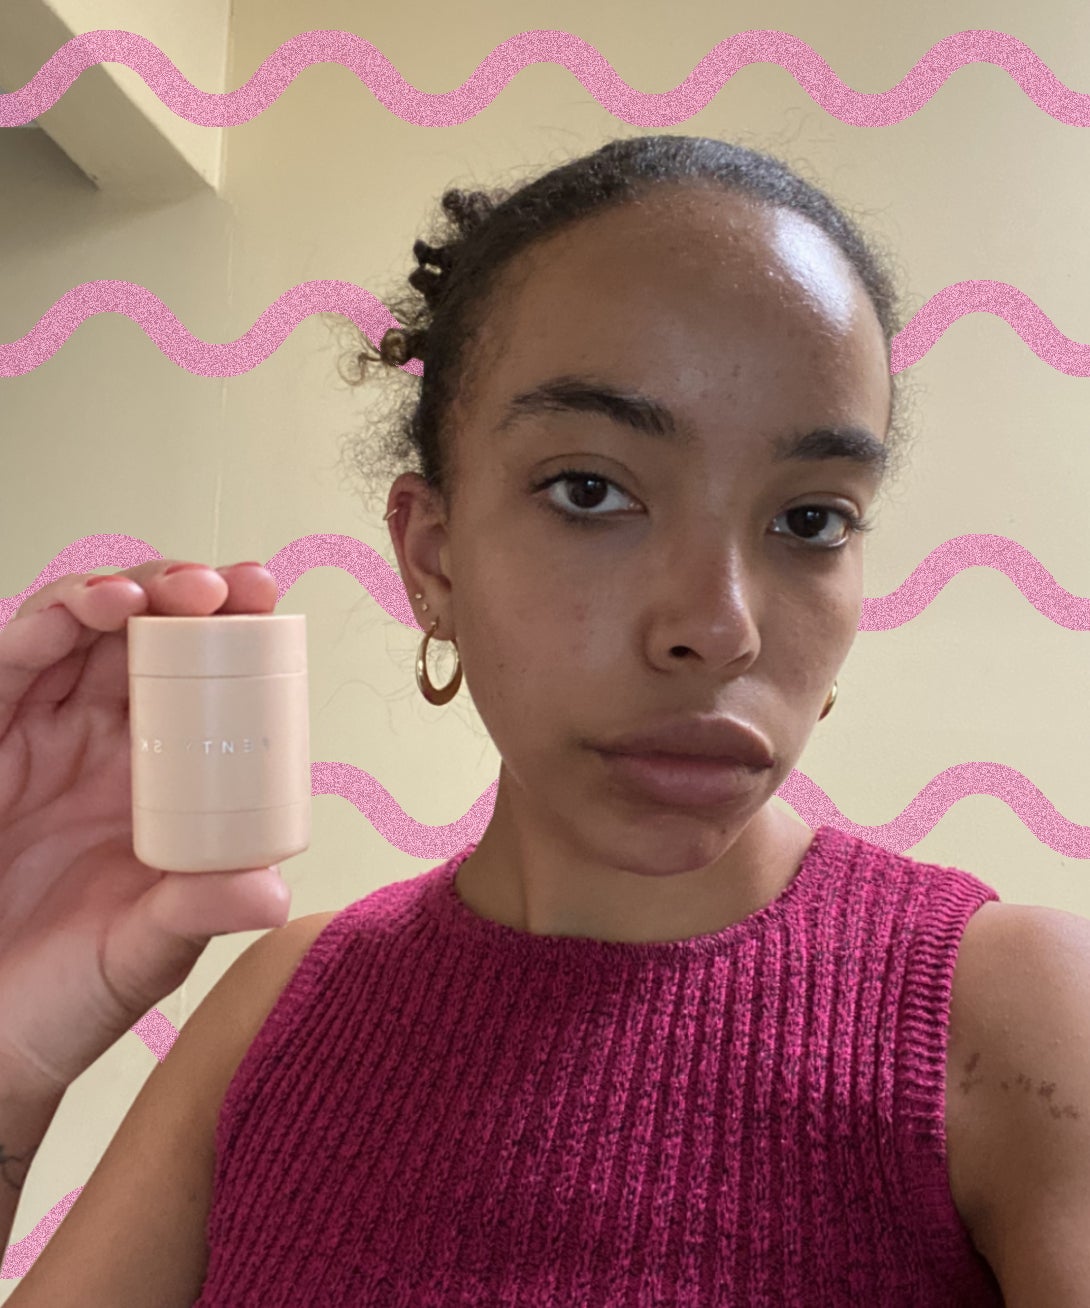 Rihanna's Fenty Skin Review: Is It Worth the Money?